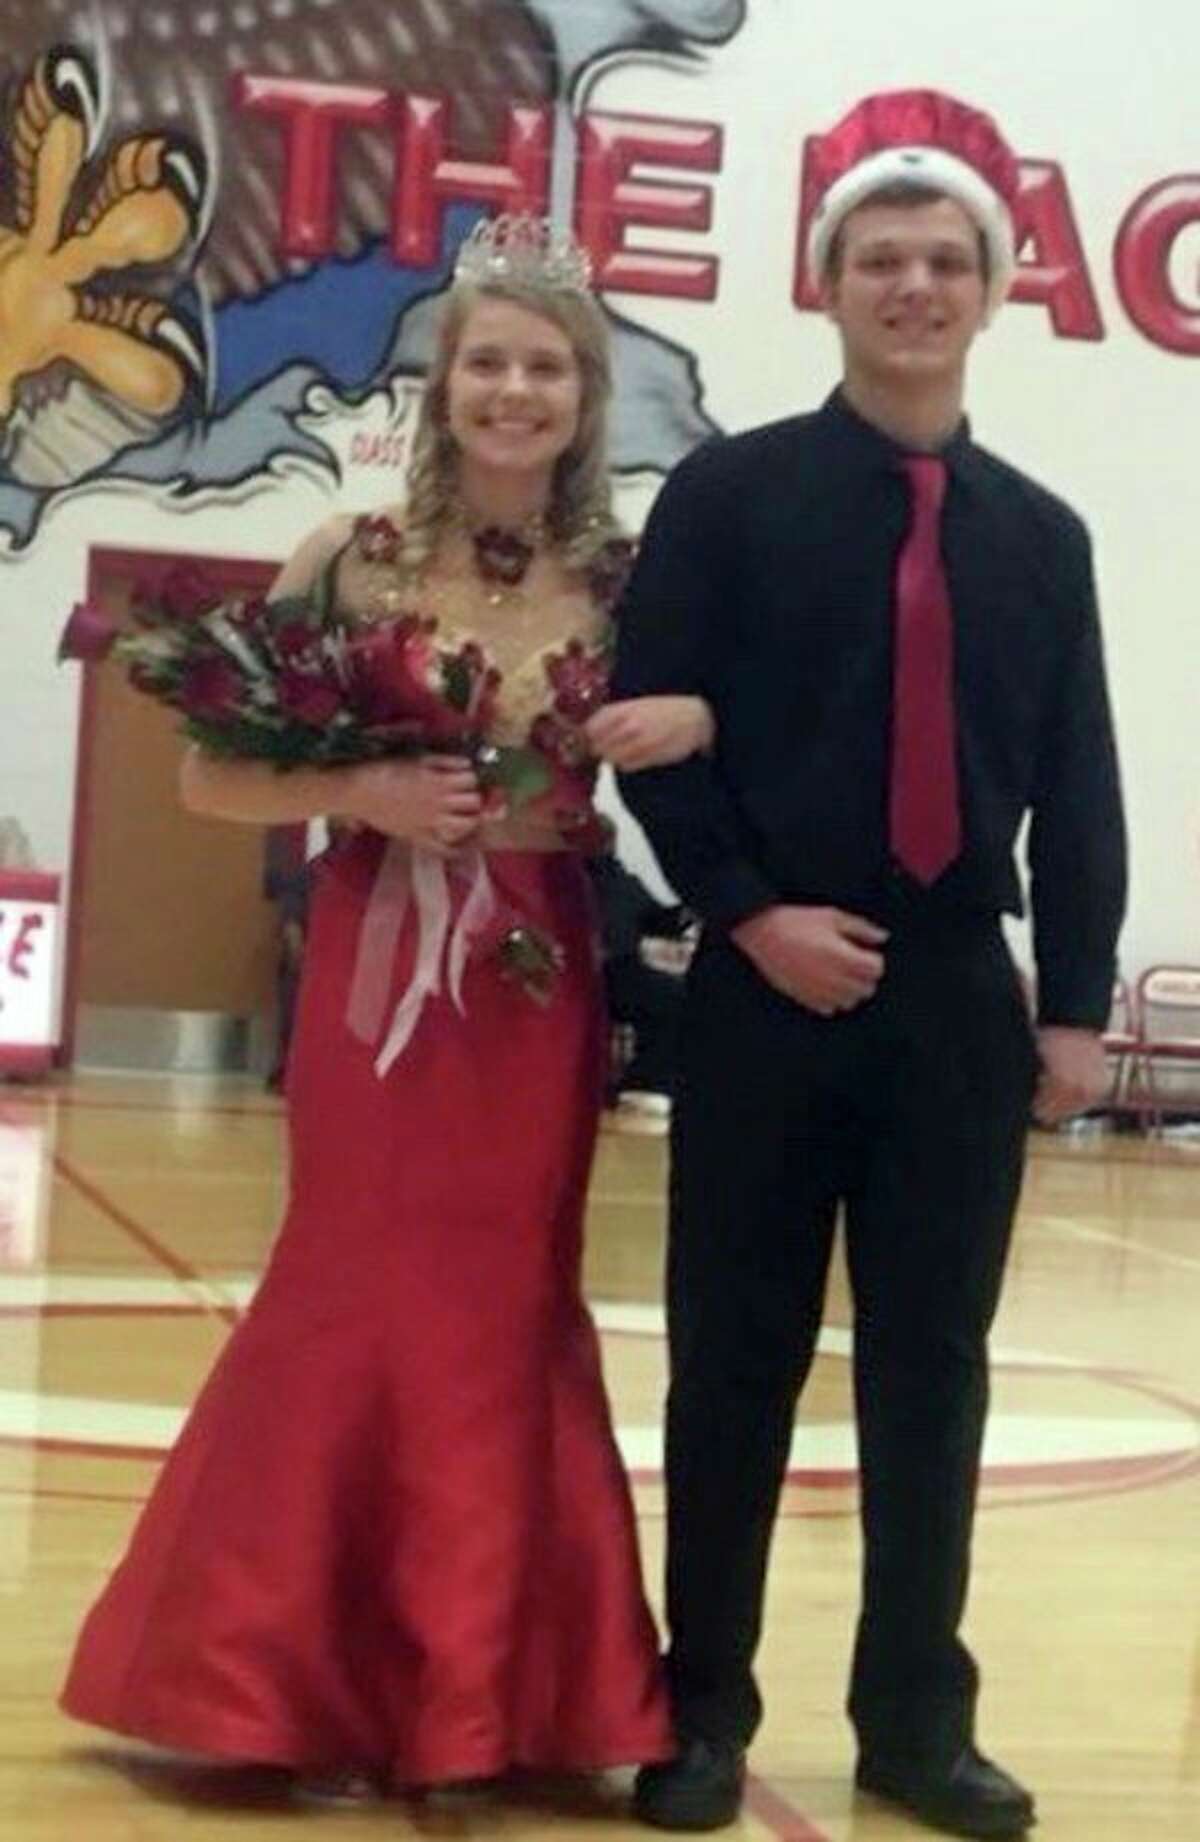 Mitchell Langley and Heidi Ewald were recently crowned Caseville's Coming Home King and Queen. (Submitted Photo)